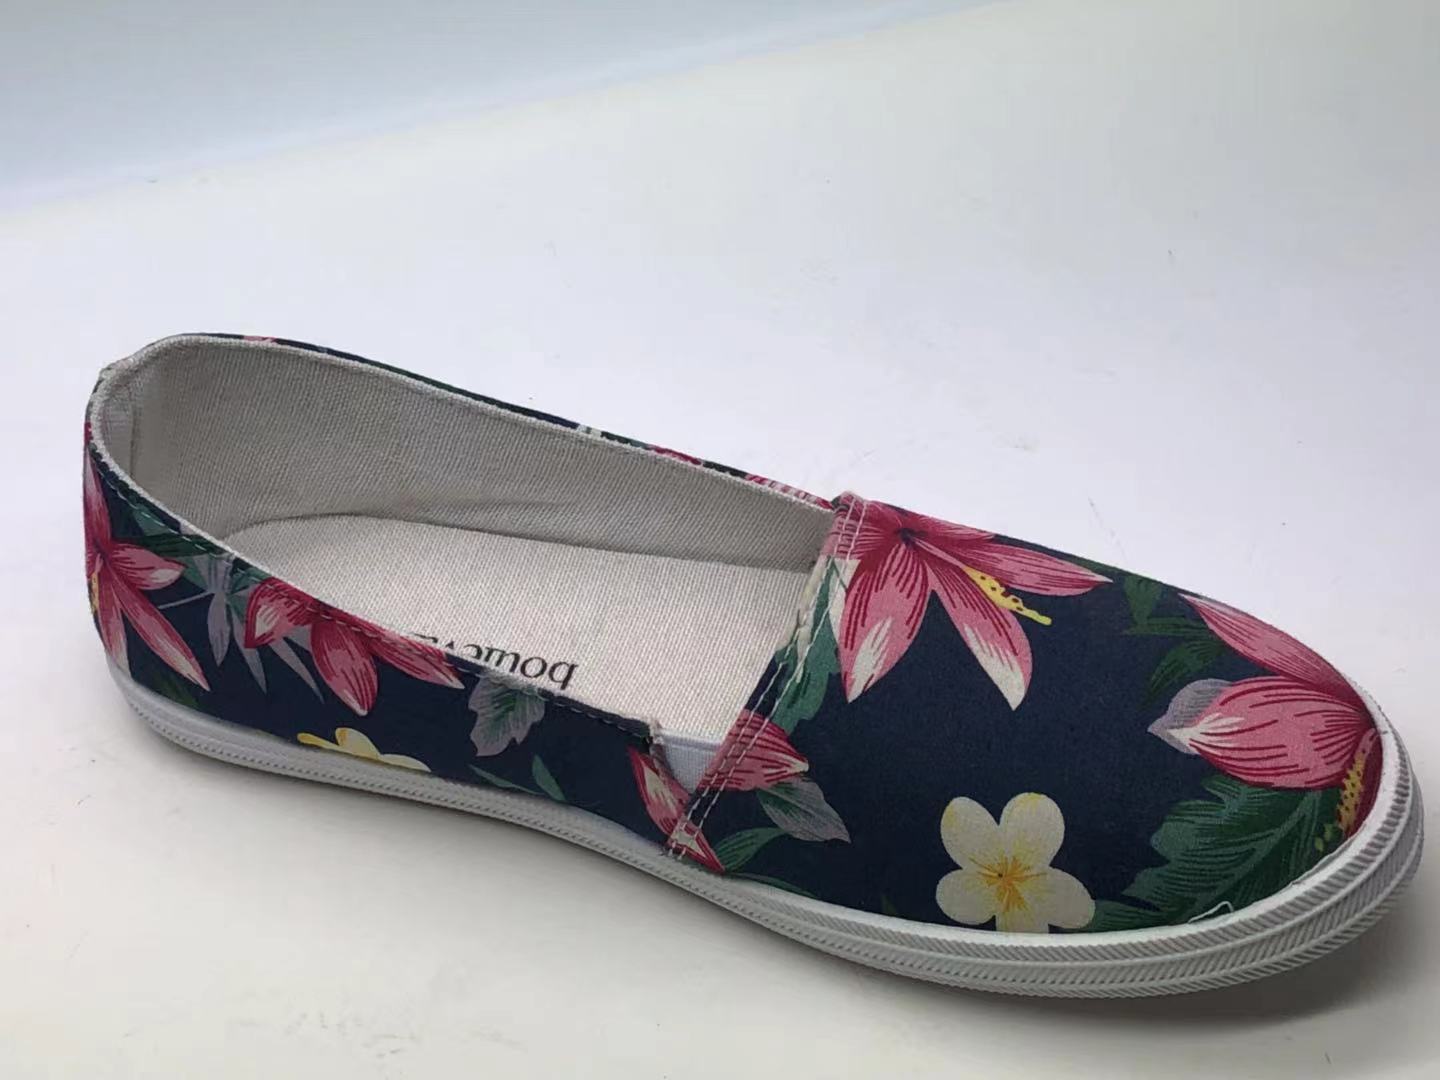 Women's Slip on Shoes Low Top Printed Fabric Sneakers Non Slip Fashion Casual Shoes